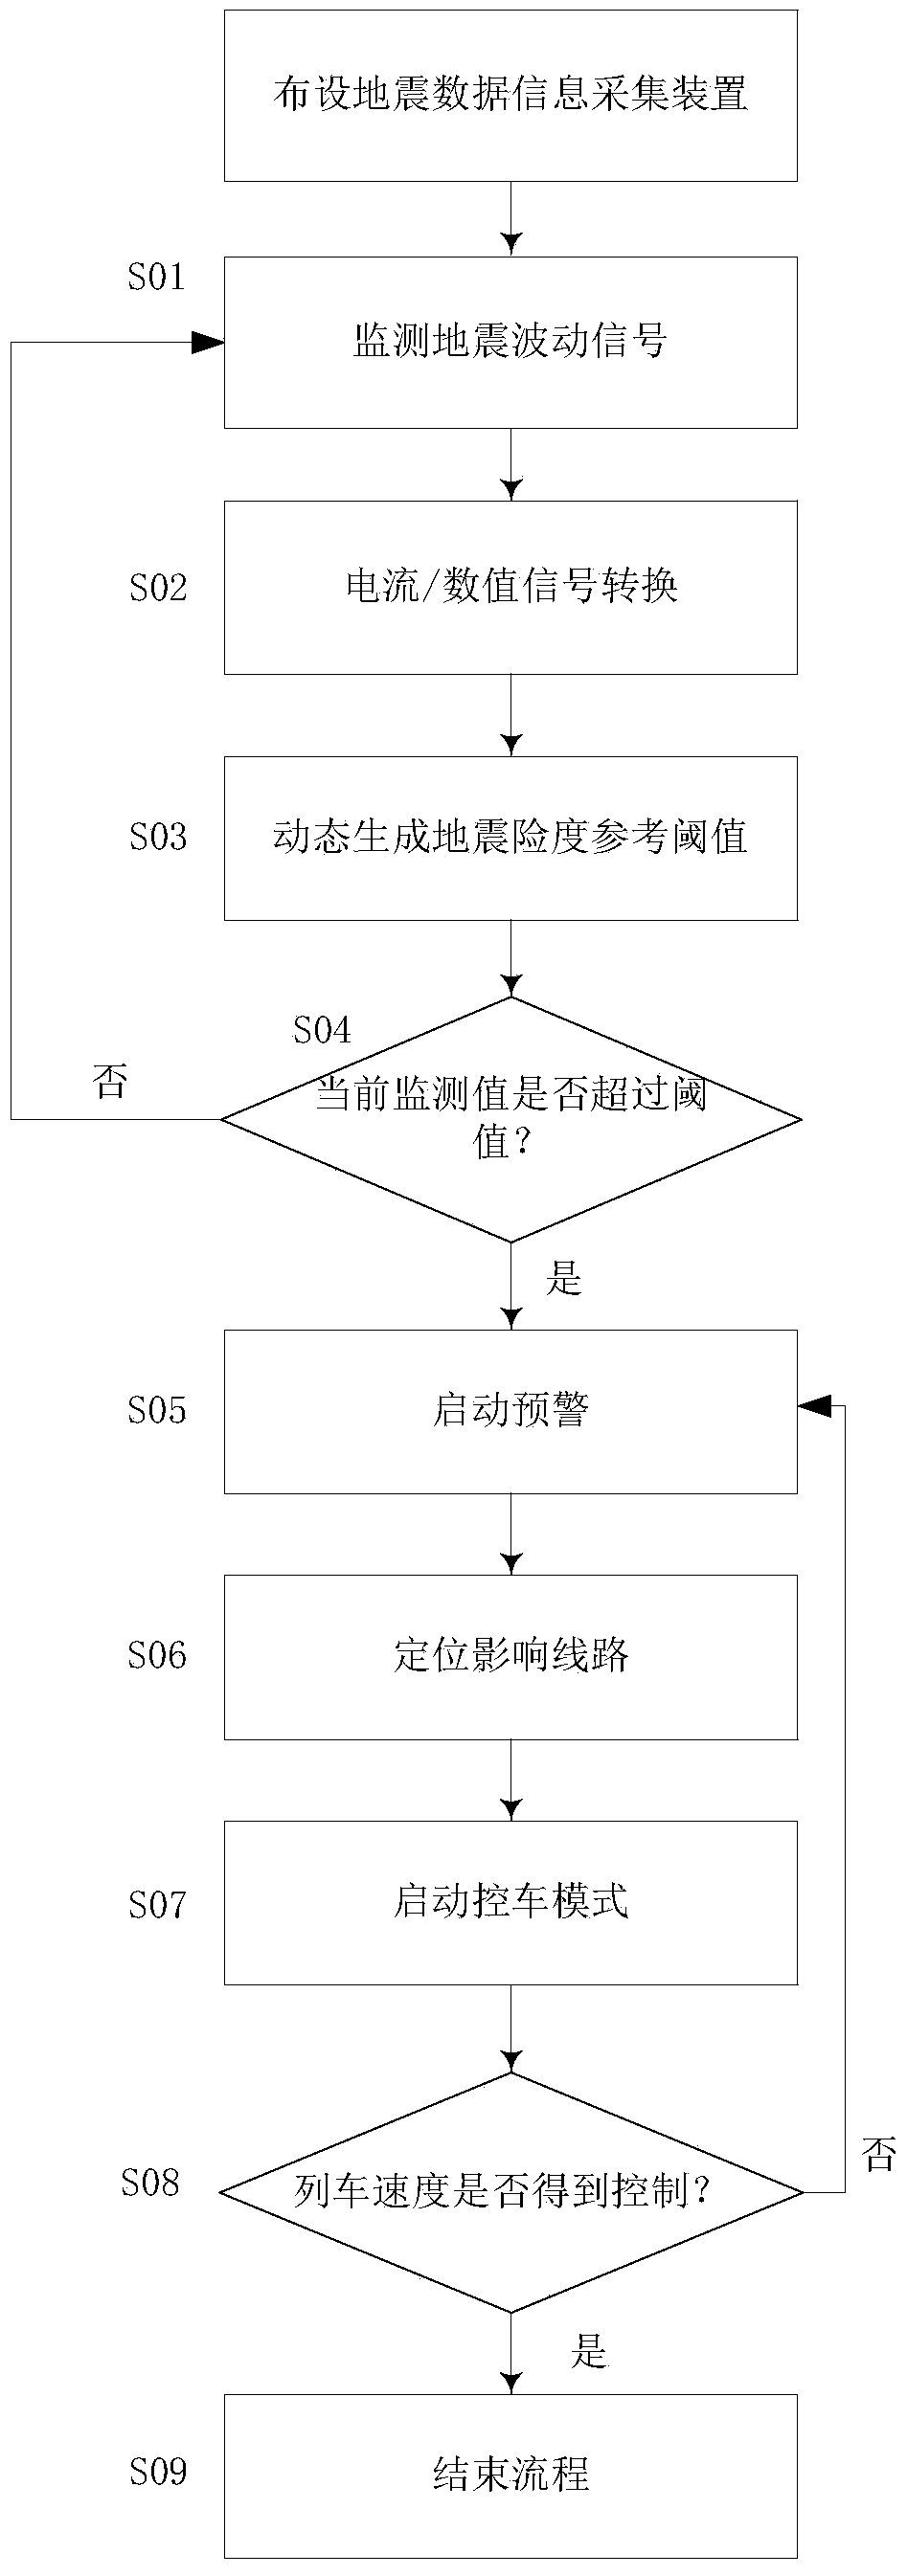 Method and system for high-speed railway seismic data information collection and early warning